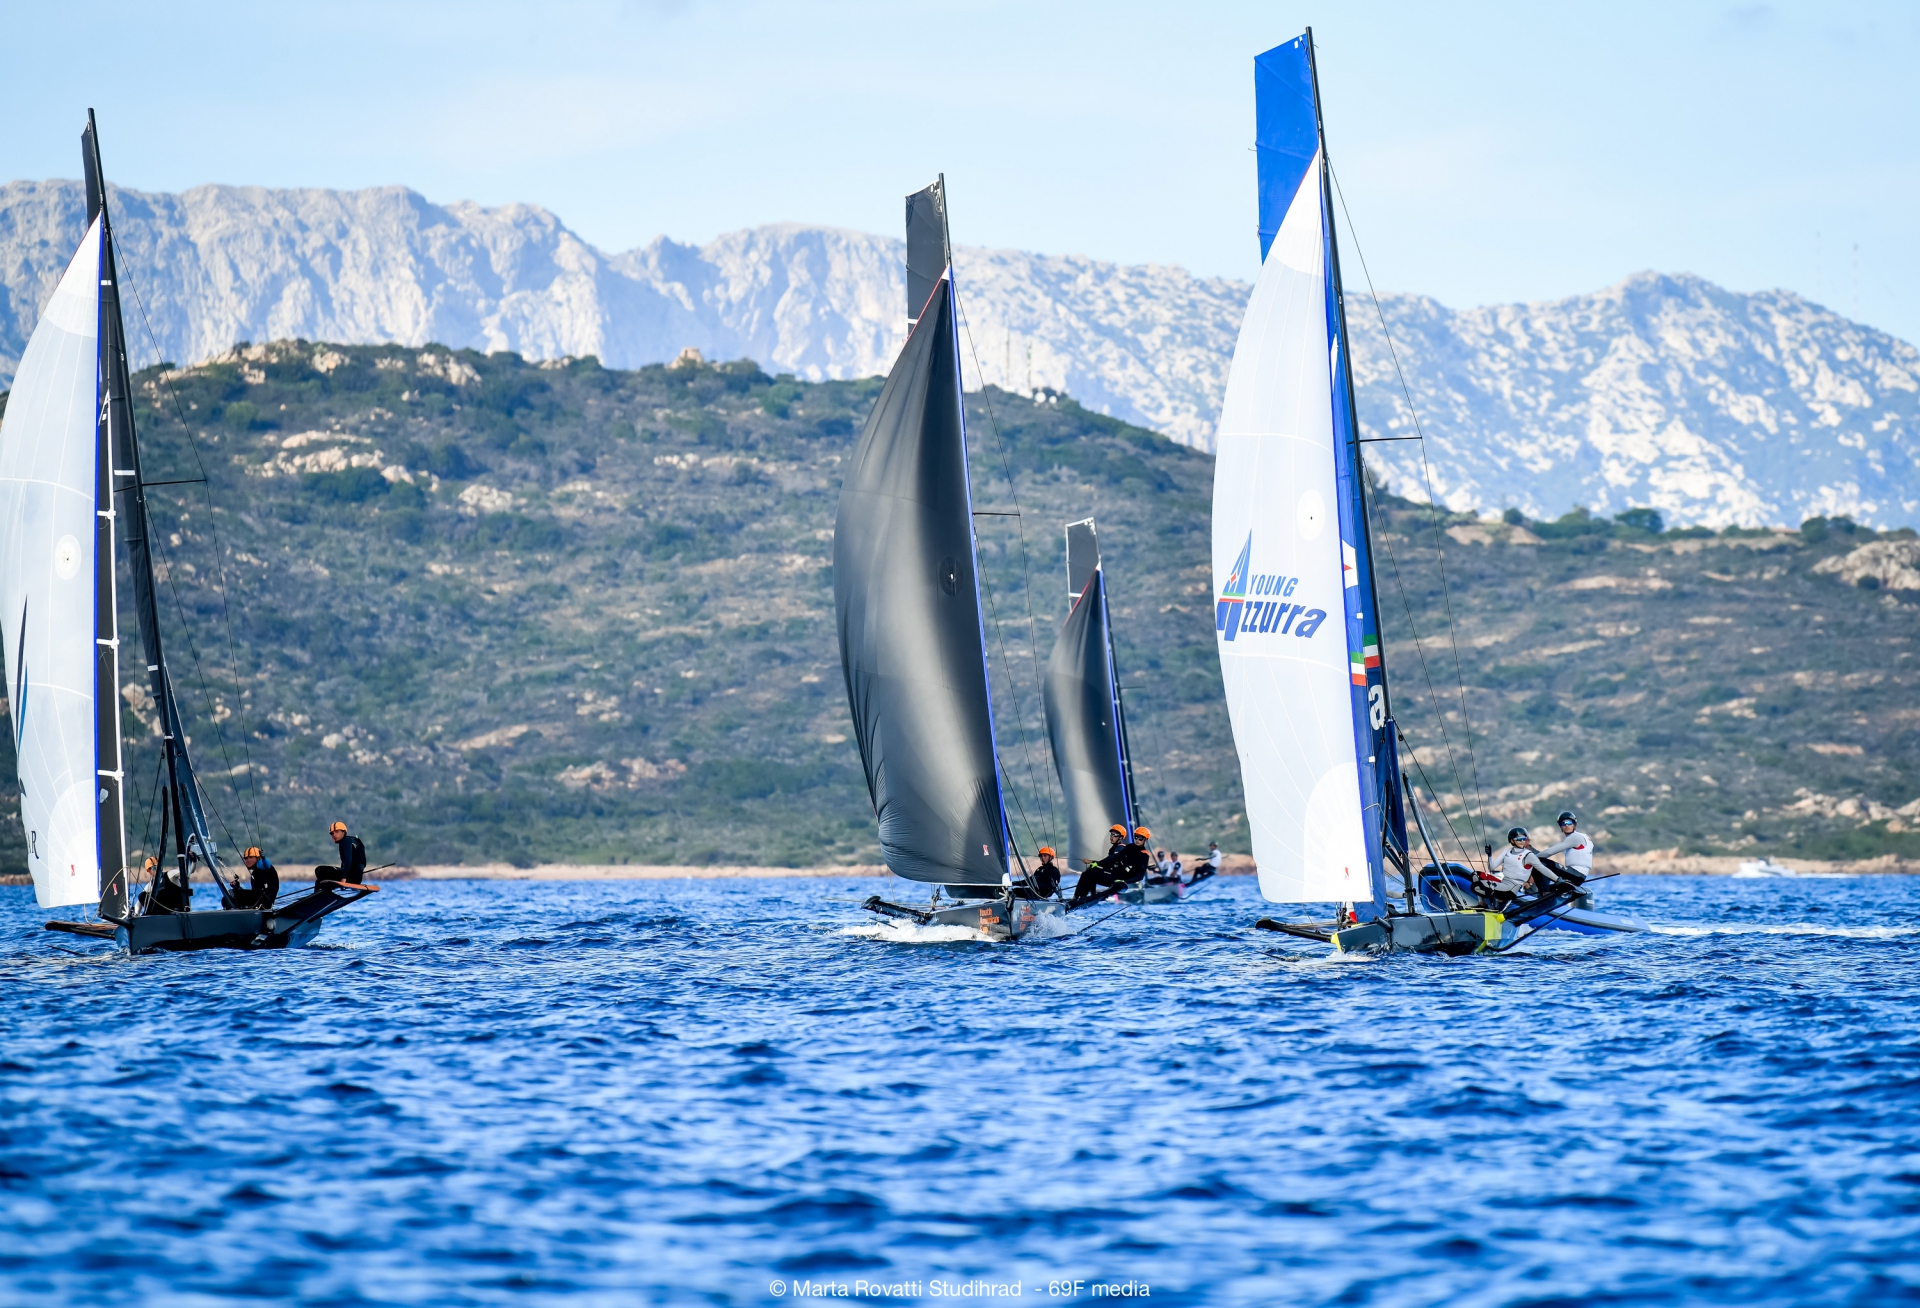 Young Azzurra leads provisional overall classification in Grand Prix 4.1 Persico 69F Cup - NEWS - Yacht Club Costa Smeralda